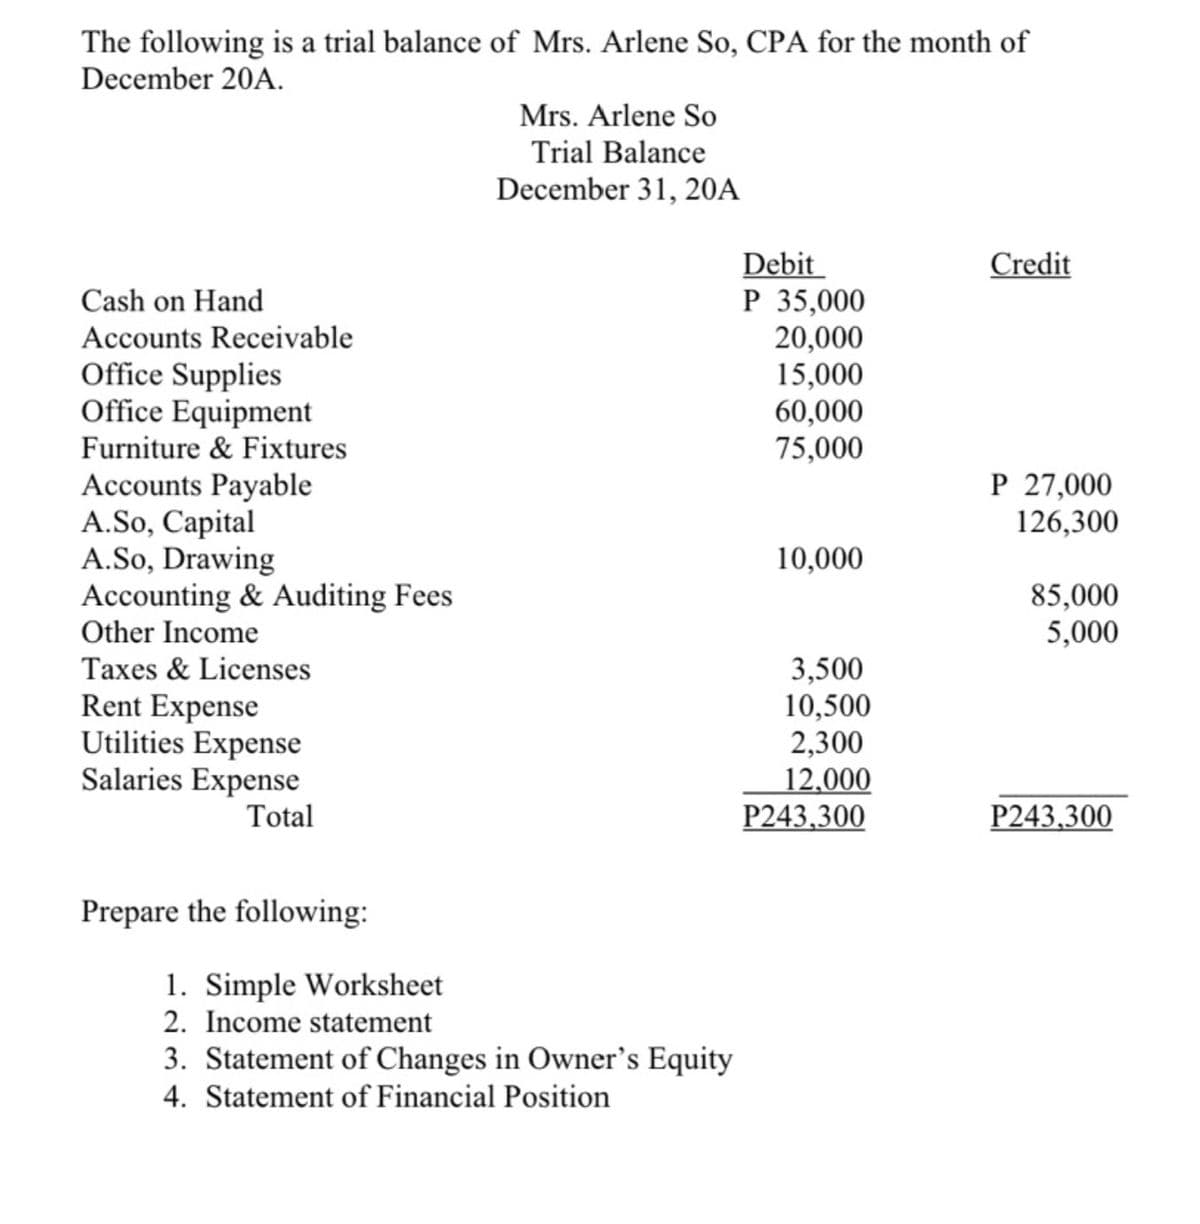 The following is a trial balance of Mrs. Arlene So, CPA for the month of
December 20A.
Mrs. Arlene So
Trial Balance
December 31, 20A
Debit
P 35,000
20,000
15,000
60,000
75,000
Credit
Cash on Hand
Accounts Receivable
Office Supplies
Office Equipment
Furniture & Fixtures
P 27,000
126,300
Accounts Payable
A.So, Capital
A.So, Drawing
Accounting & Auditing Fees
Other Income
10,000
85,000
5,000
3,500
10,500
2,300
12,000
P243,300
Taxes & Licenses
Rent Expense
Utilities Expense
Salaries Expense
Total
P243,300
Prepare the following:
1. Simple Worksheet
2. Income statement
3. Statement of Changes in Owner's Equity
4. Statement of Financial Position
